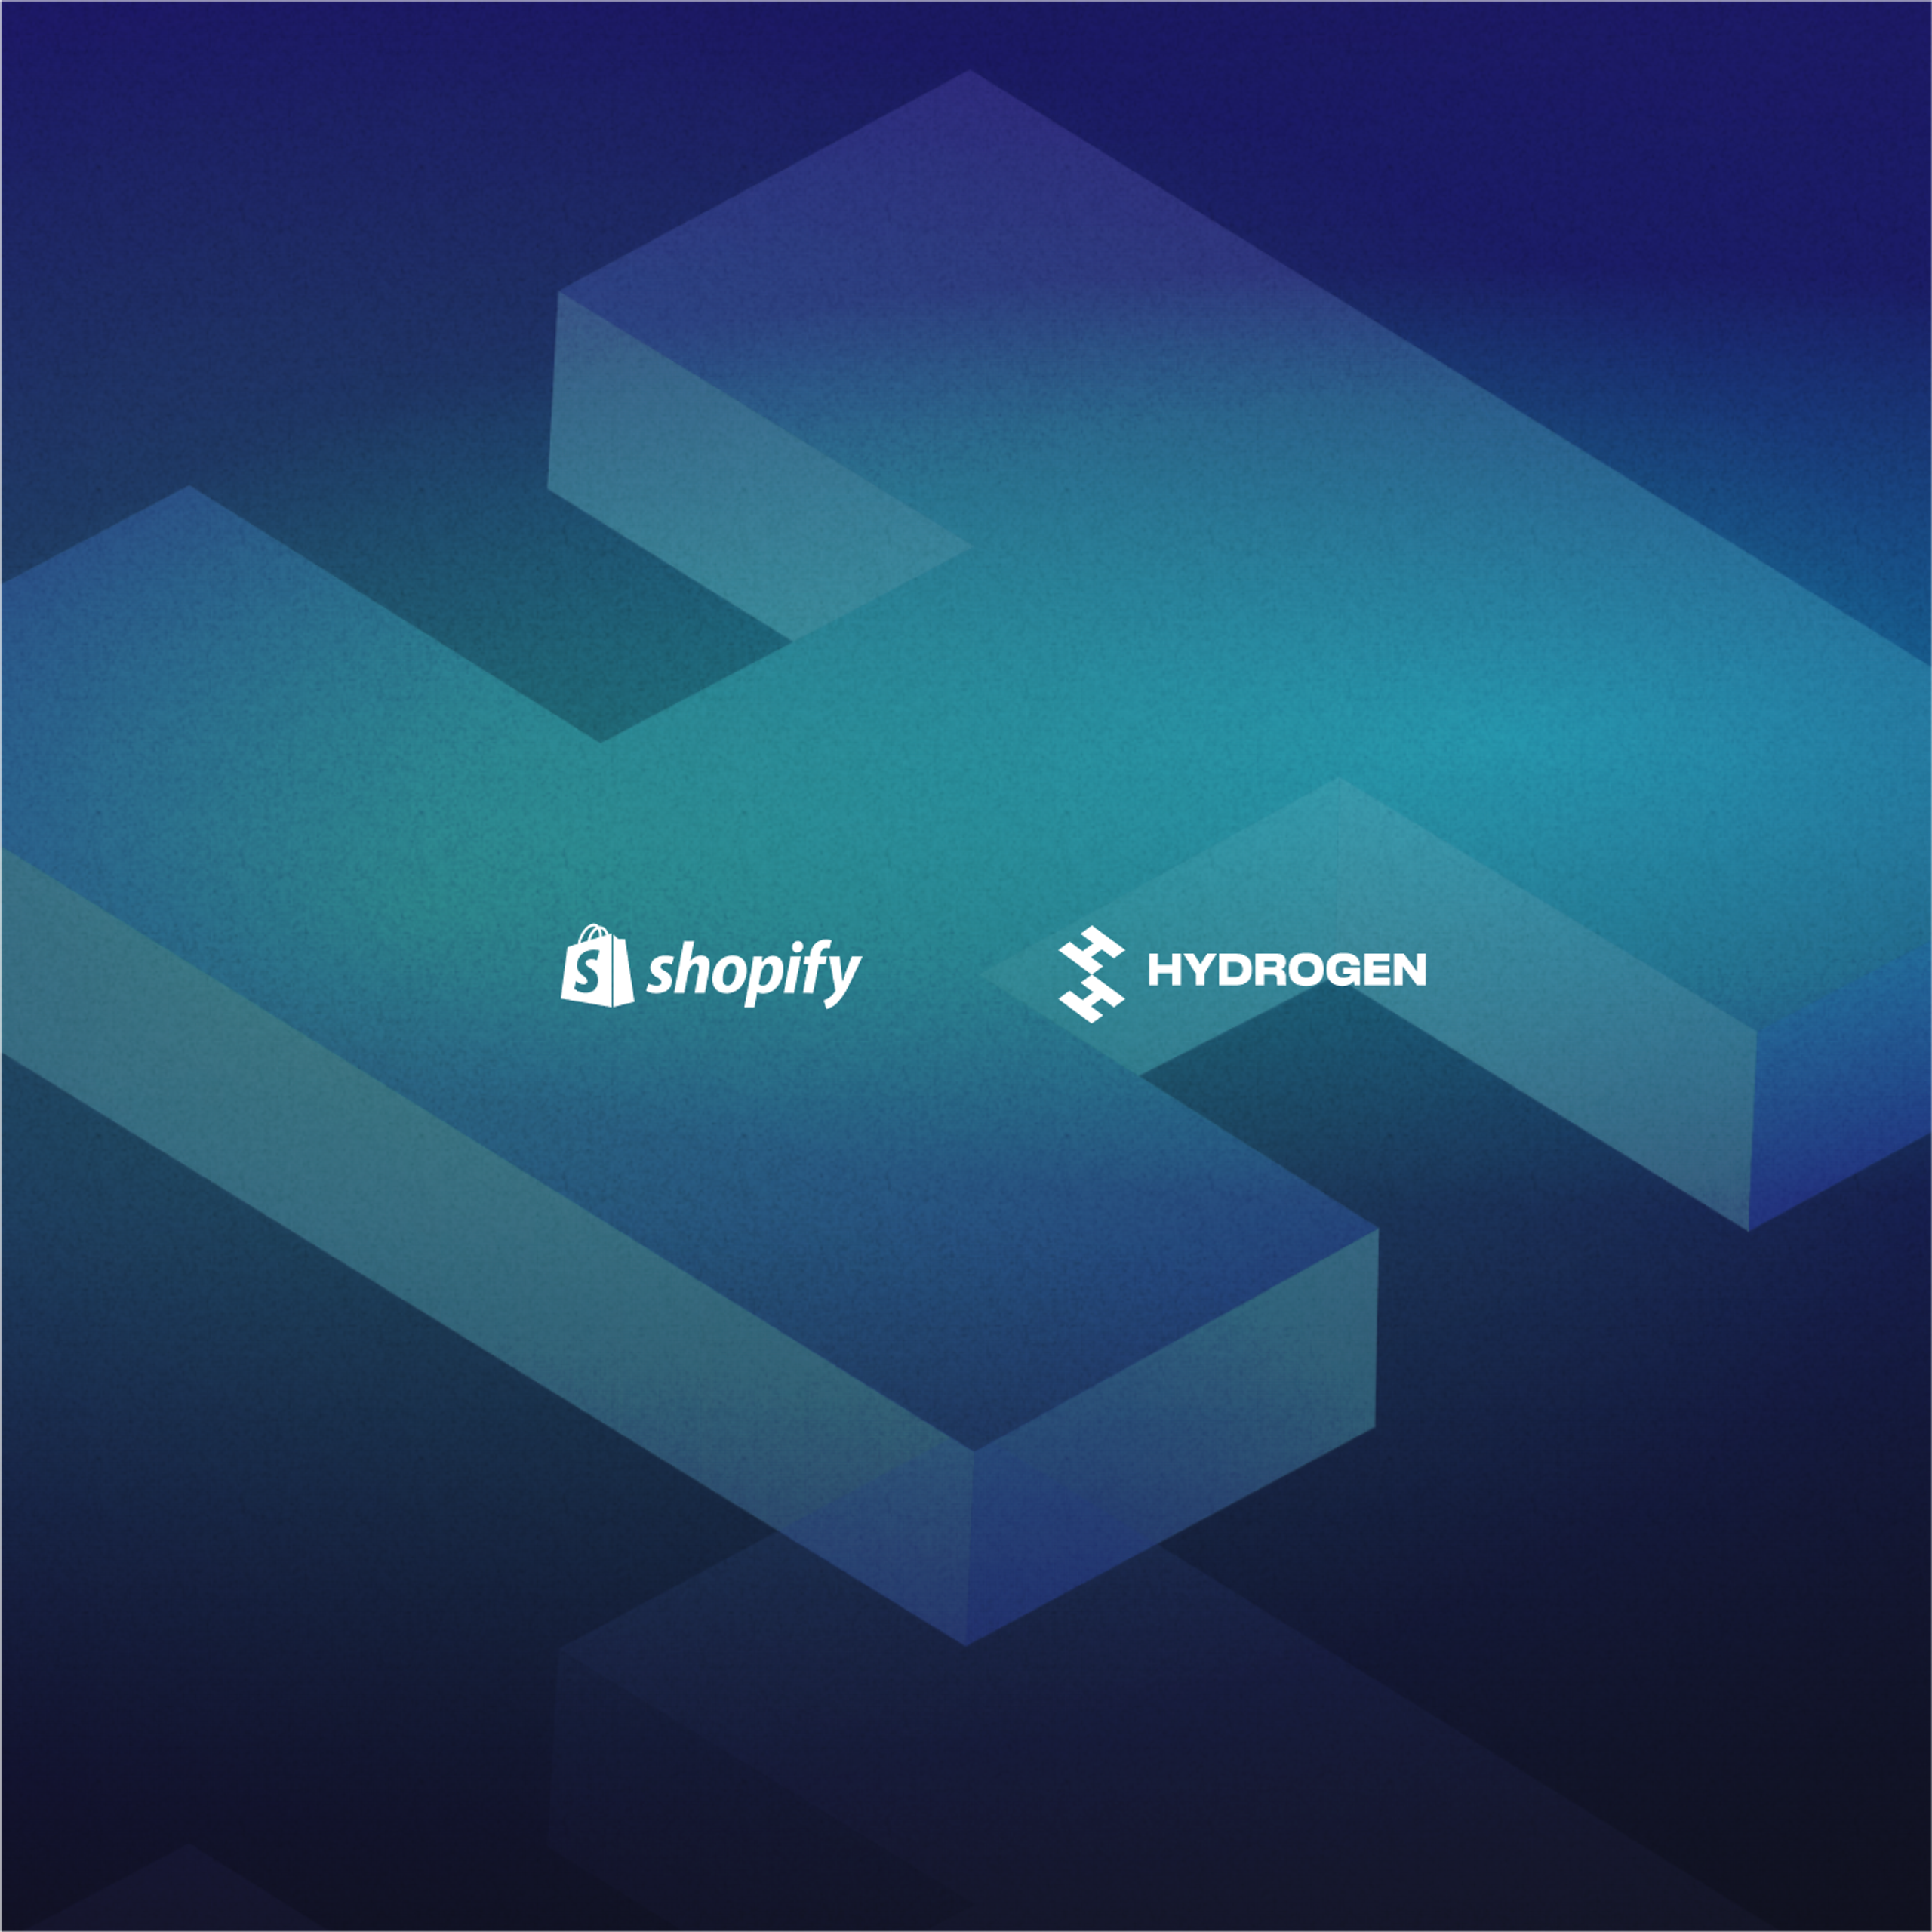 Shopify and Hydrogen logos